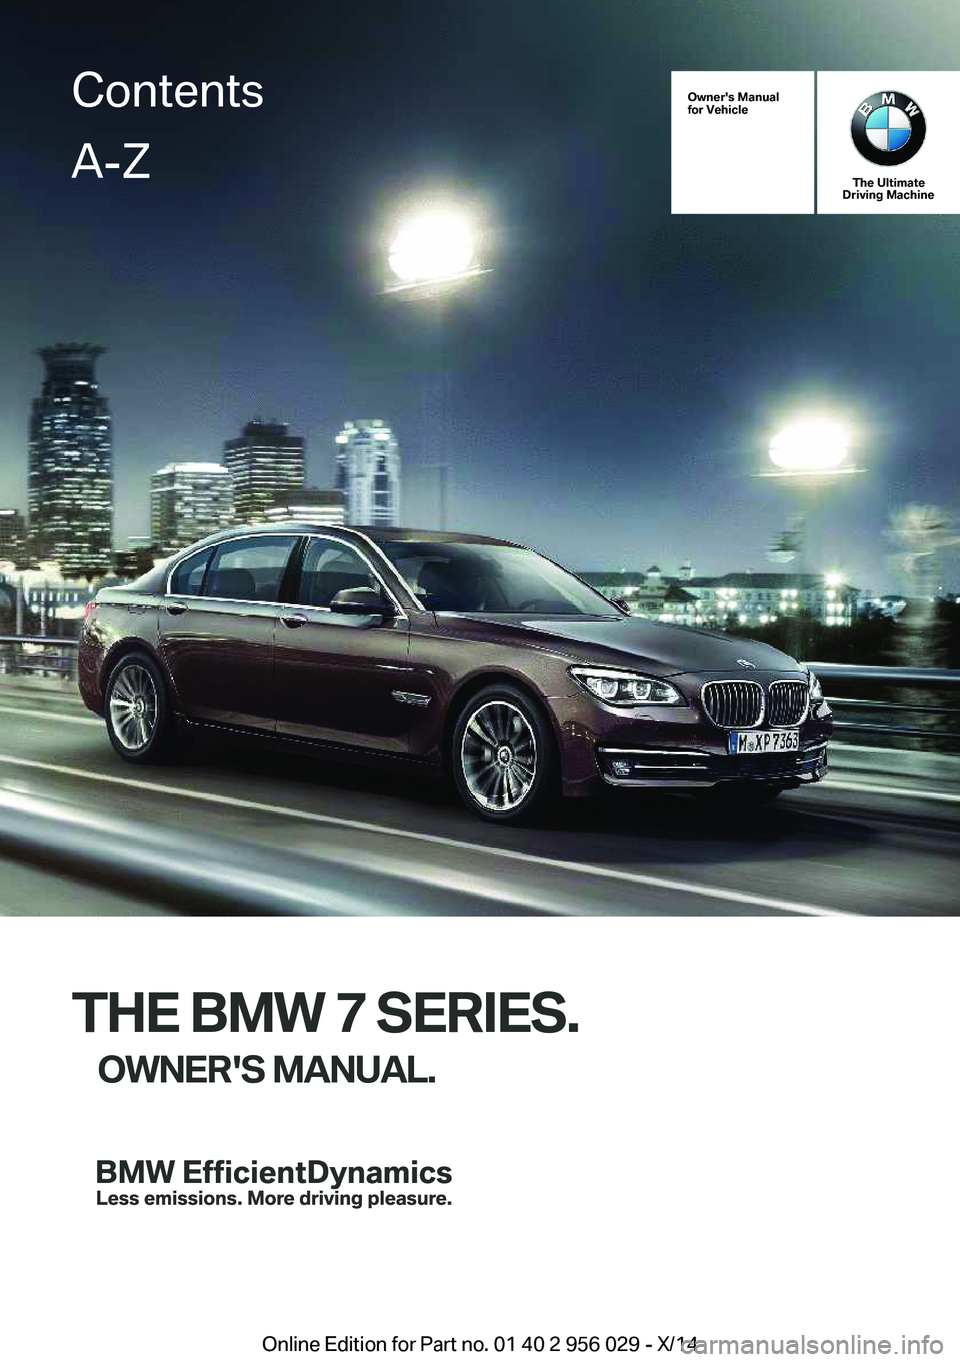 BMW 750LI XDRIVE SEDAN 2014  Owners Manual Owner's Manual
for Vehicle
The Ultimate
Driving Machine
THE BMW 7 SERIES.
OWNER'S MANUAL.
ContentsA-Z
Online Edition for Part no. 01 40 2 956 029 - X/14   